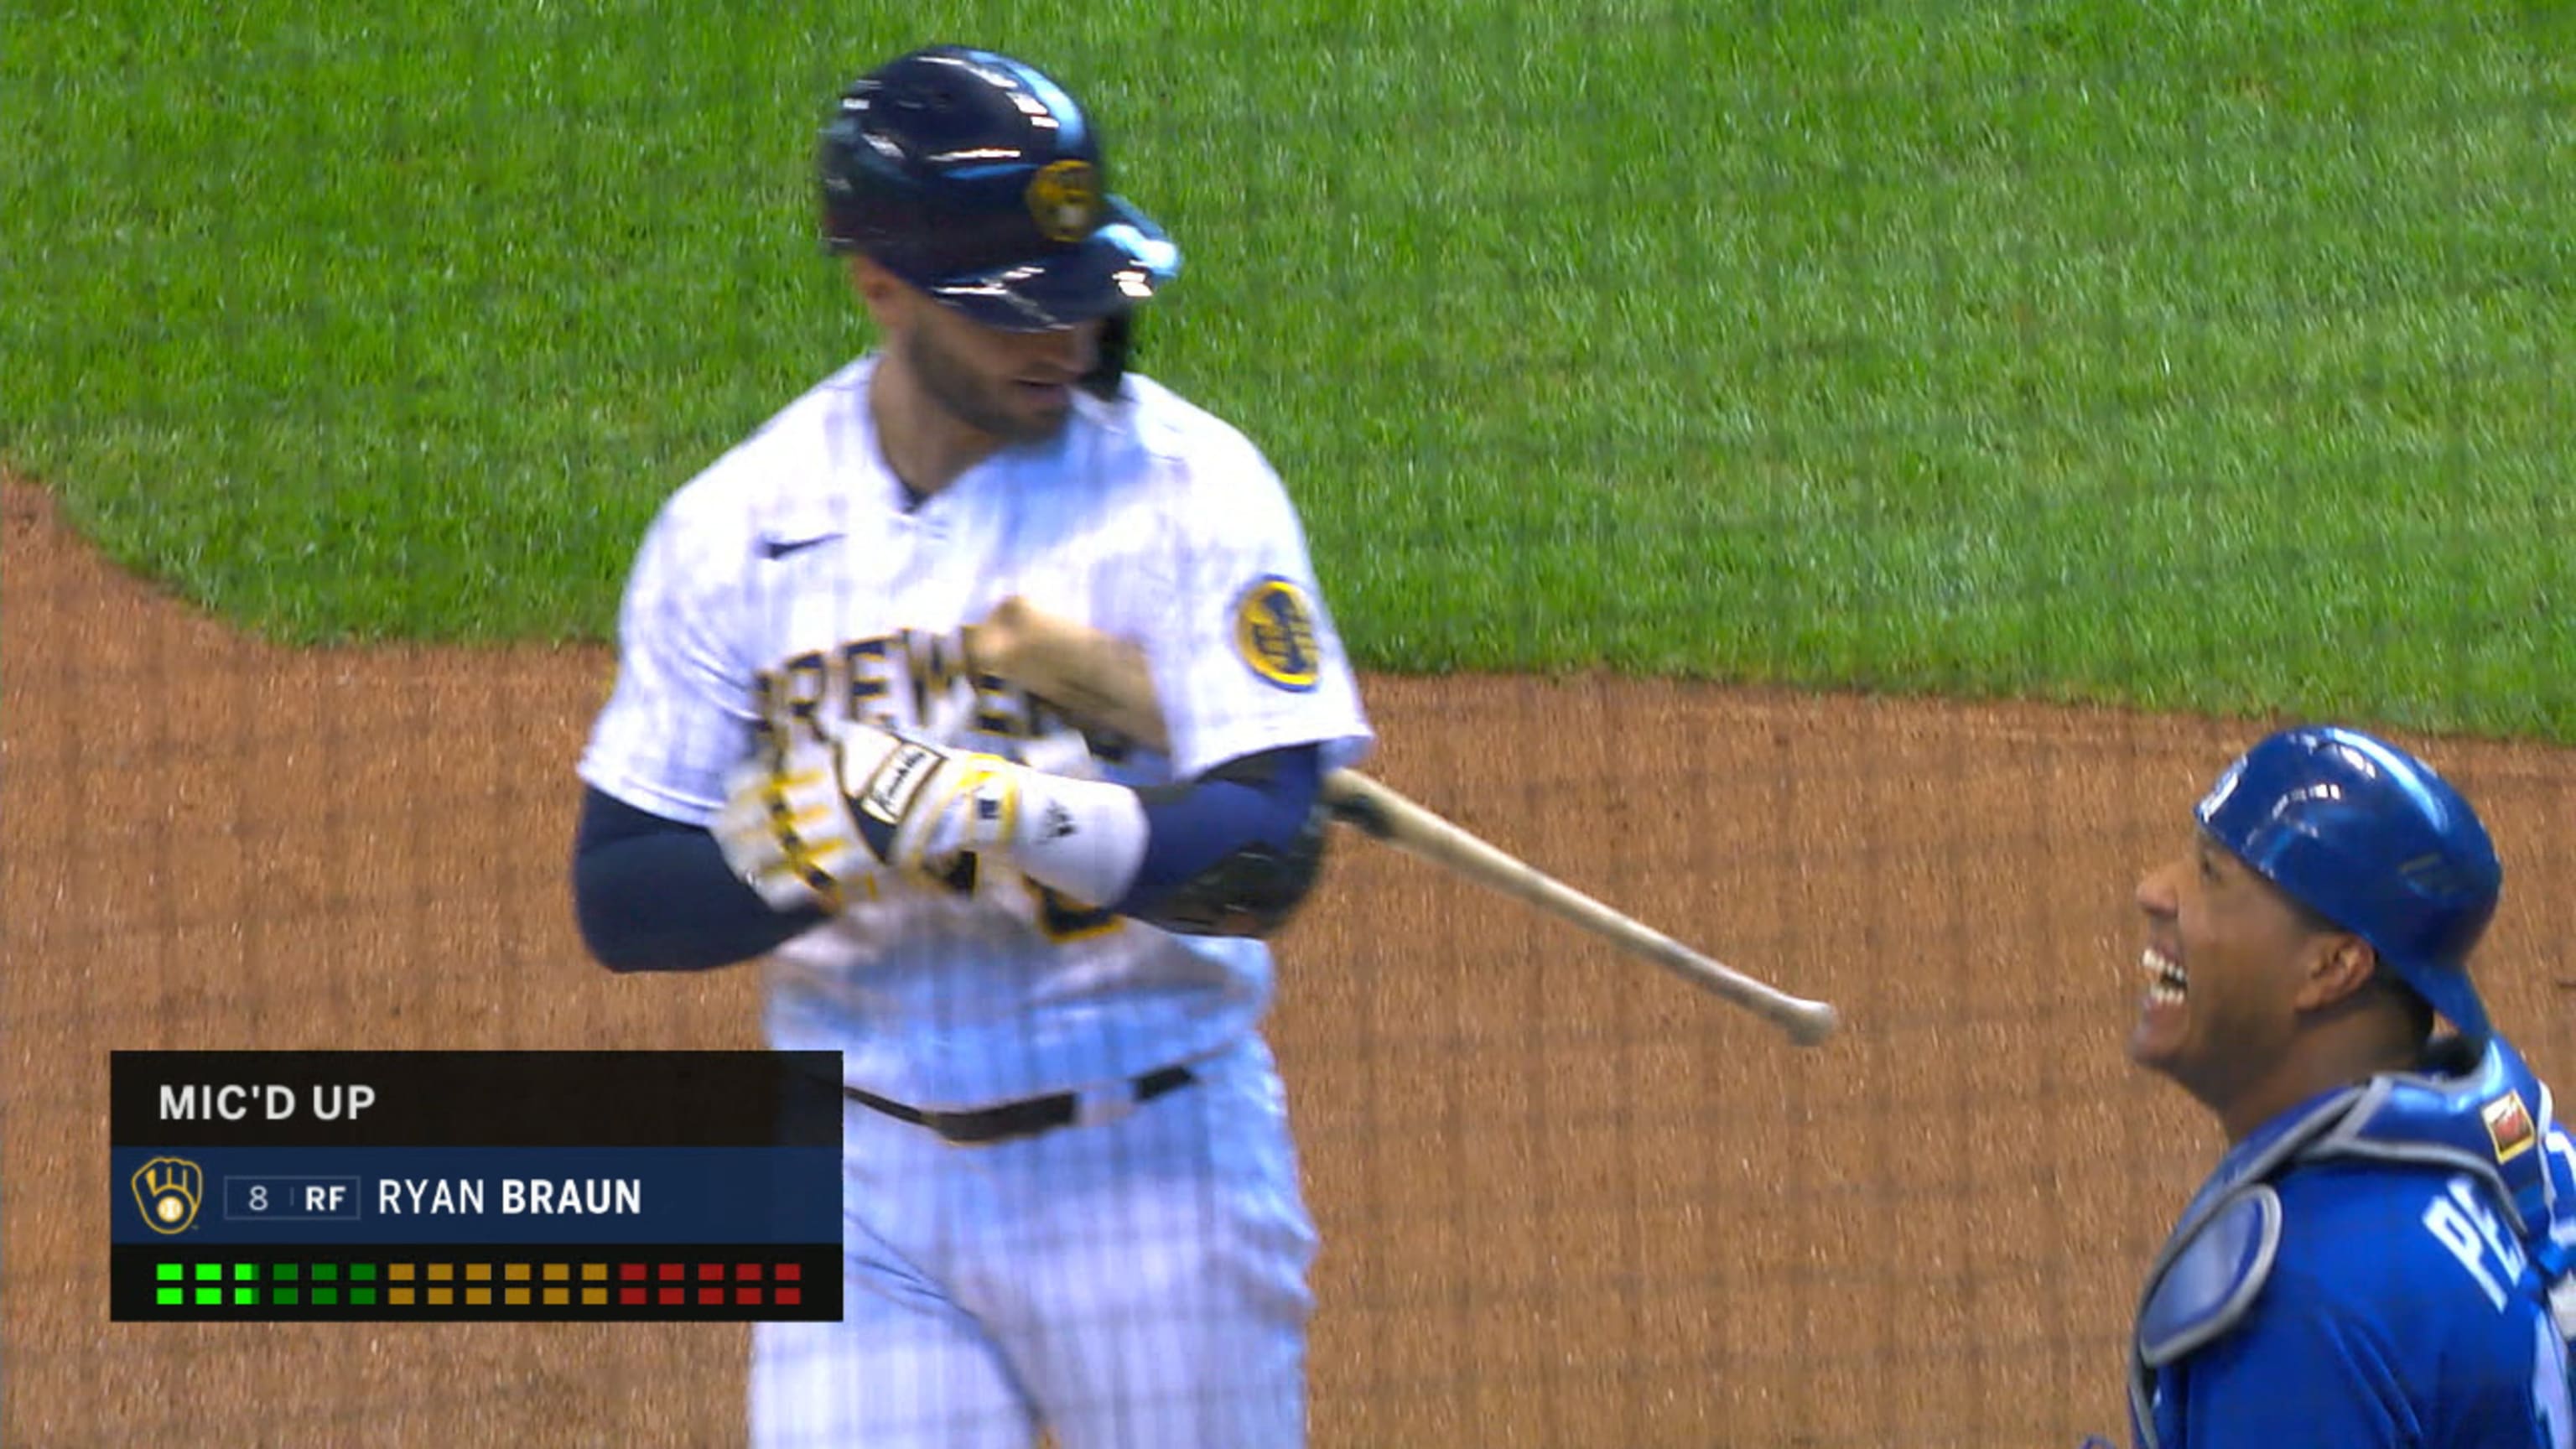 Report: Ryan Braun suspension expected after all-star break